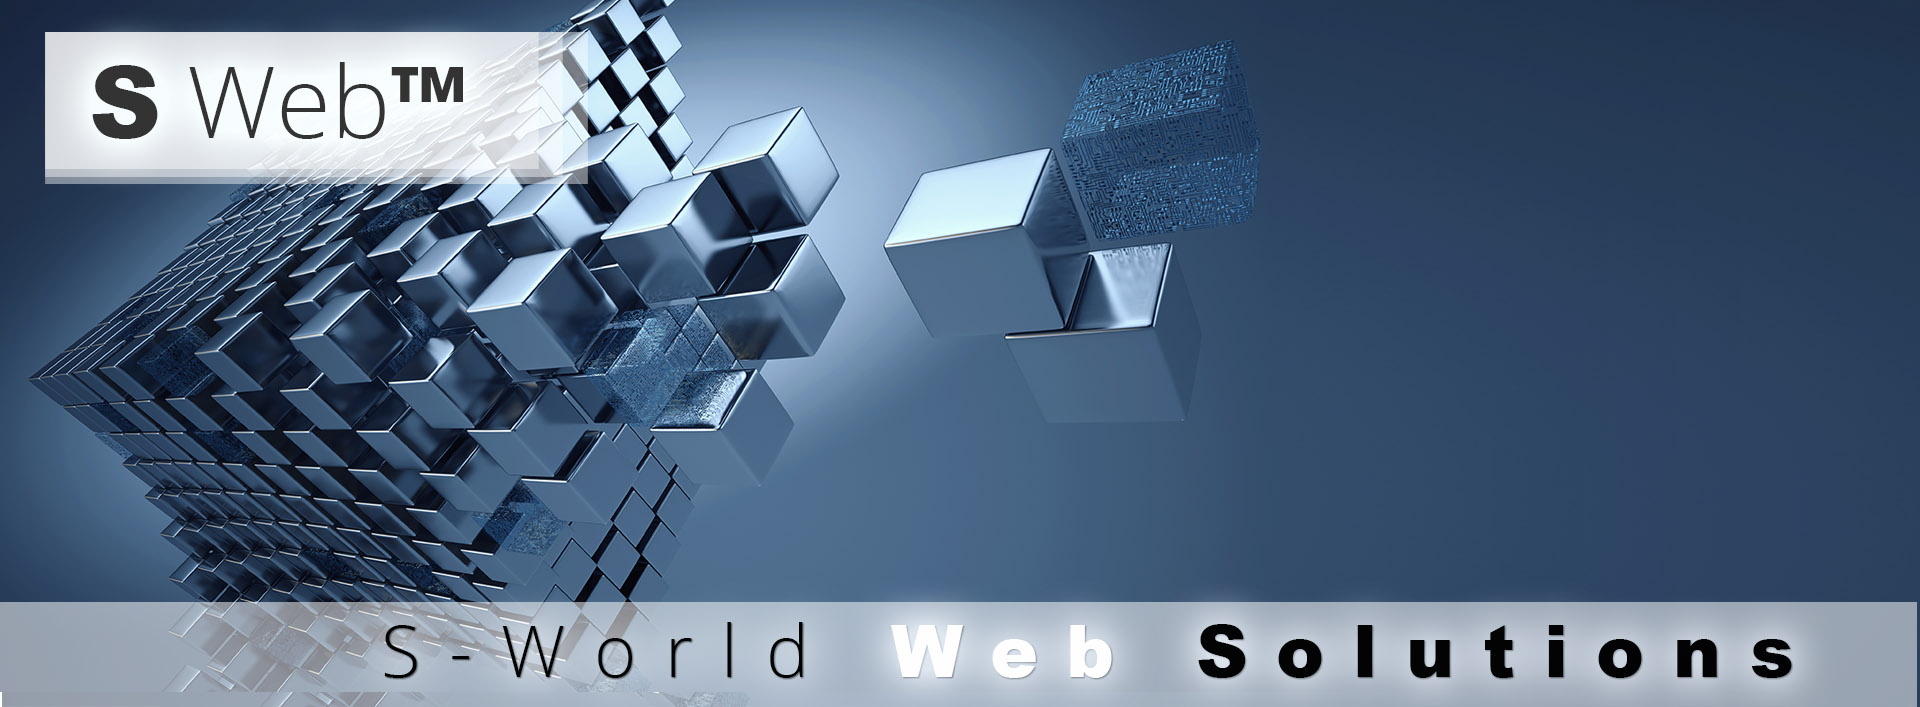 S-Web__S-World-Web-Solutions